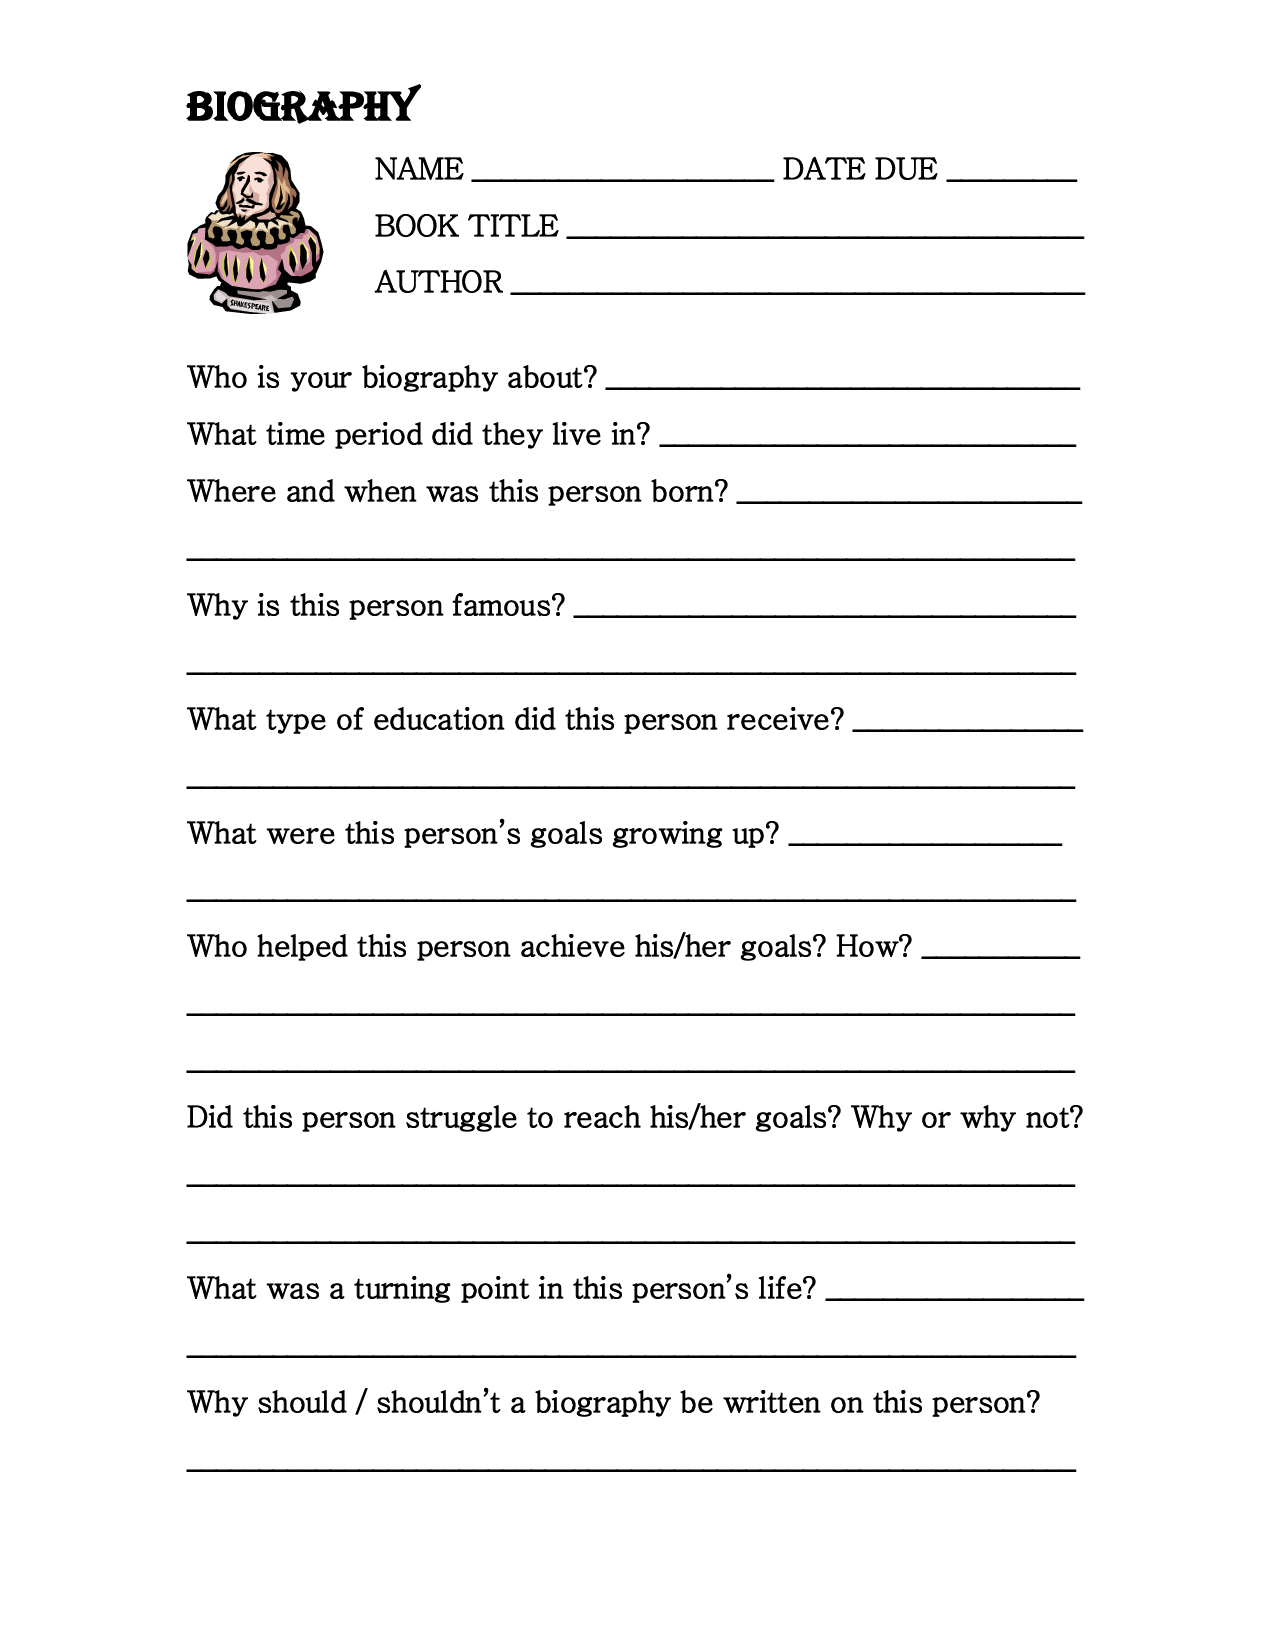 Free Printable Biography Template from www.printablee.com